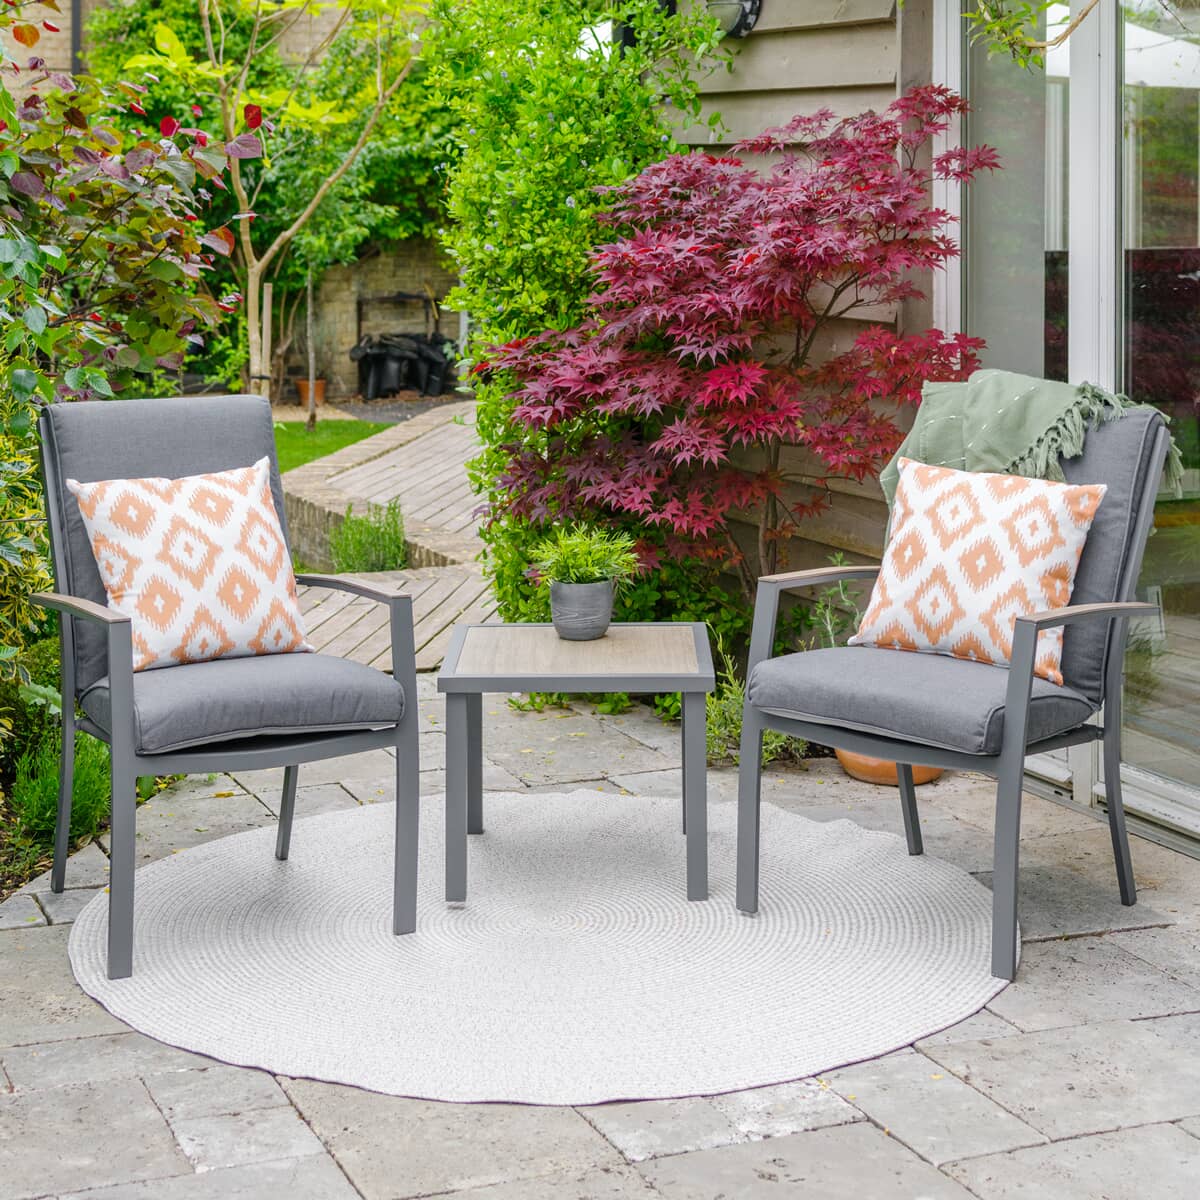 LG Outdoor Monza Duo Set with Highback Chairs